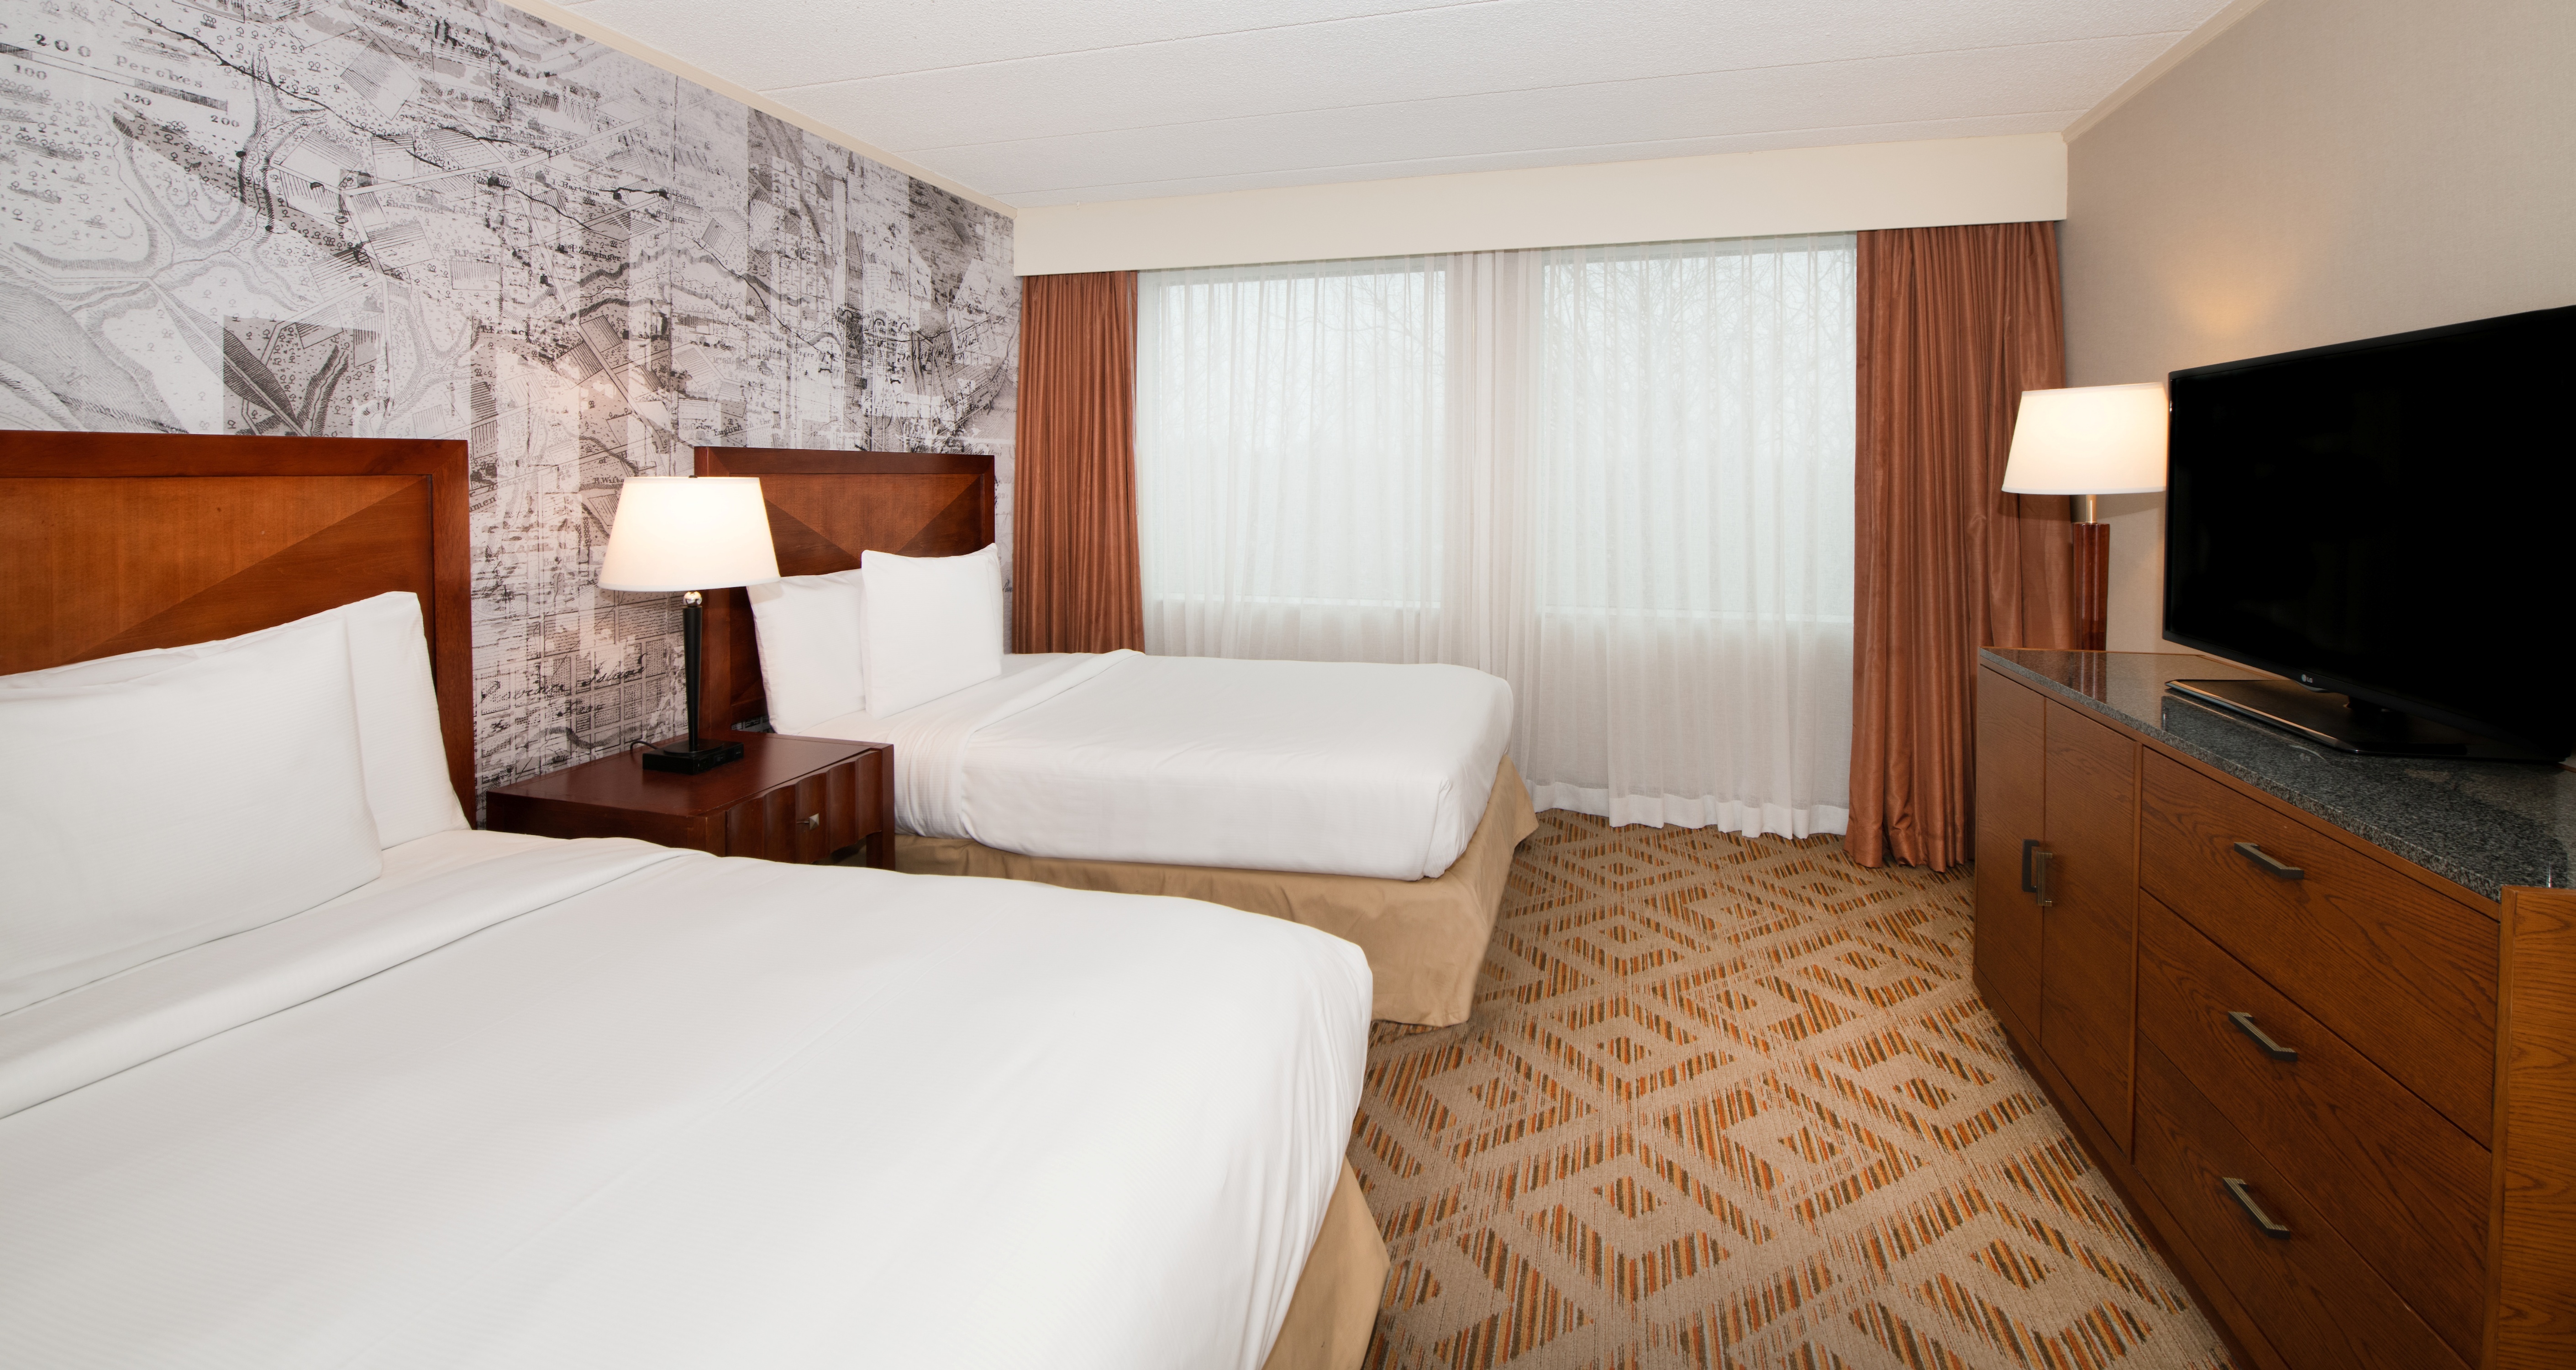 Ideal for groups traveling together, our rooms with two double-size beds make travel easy.